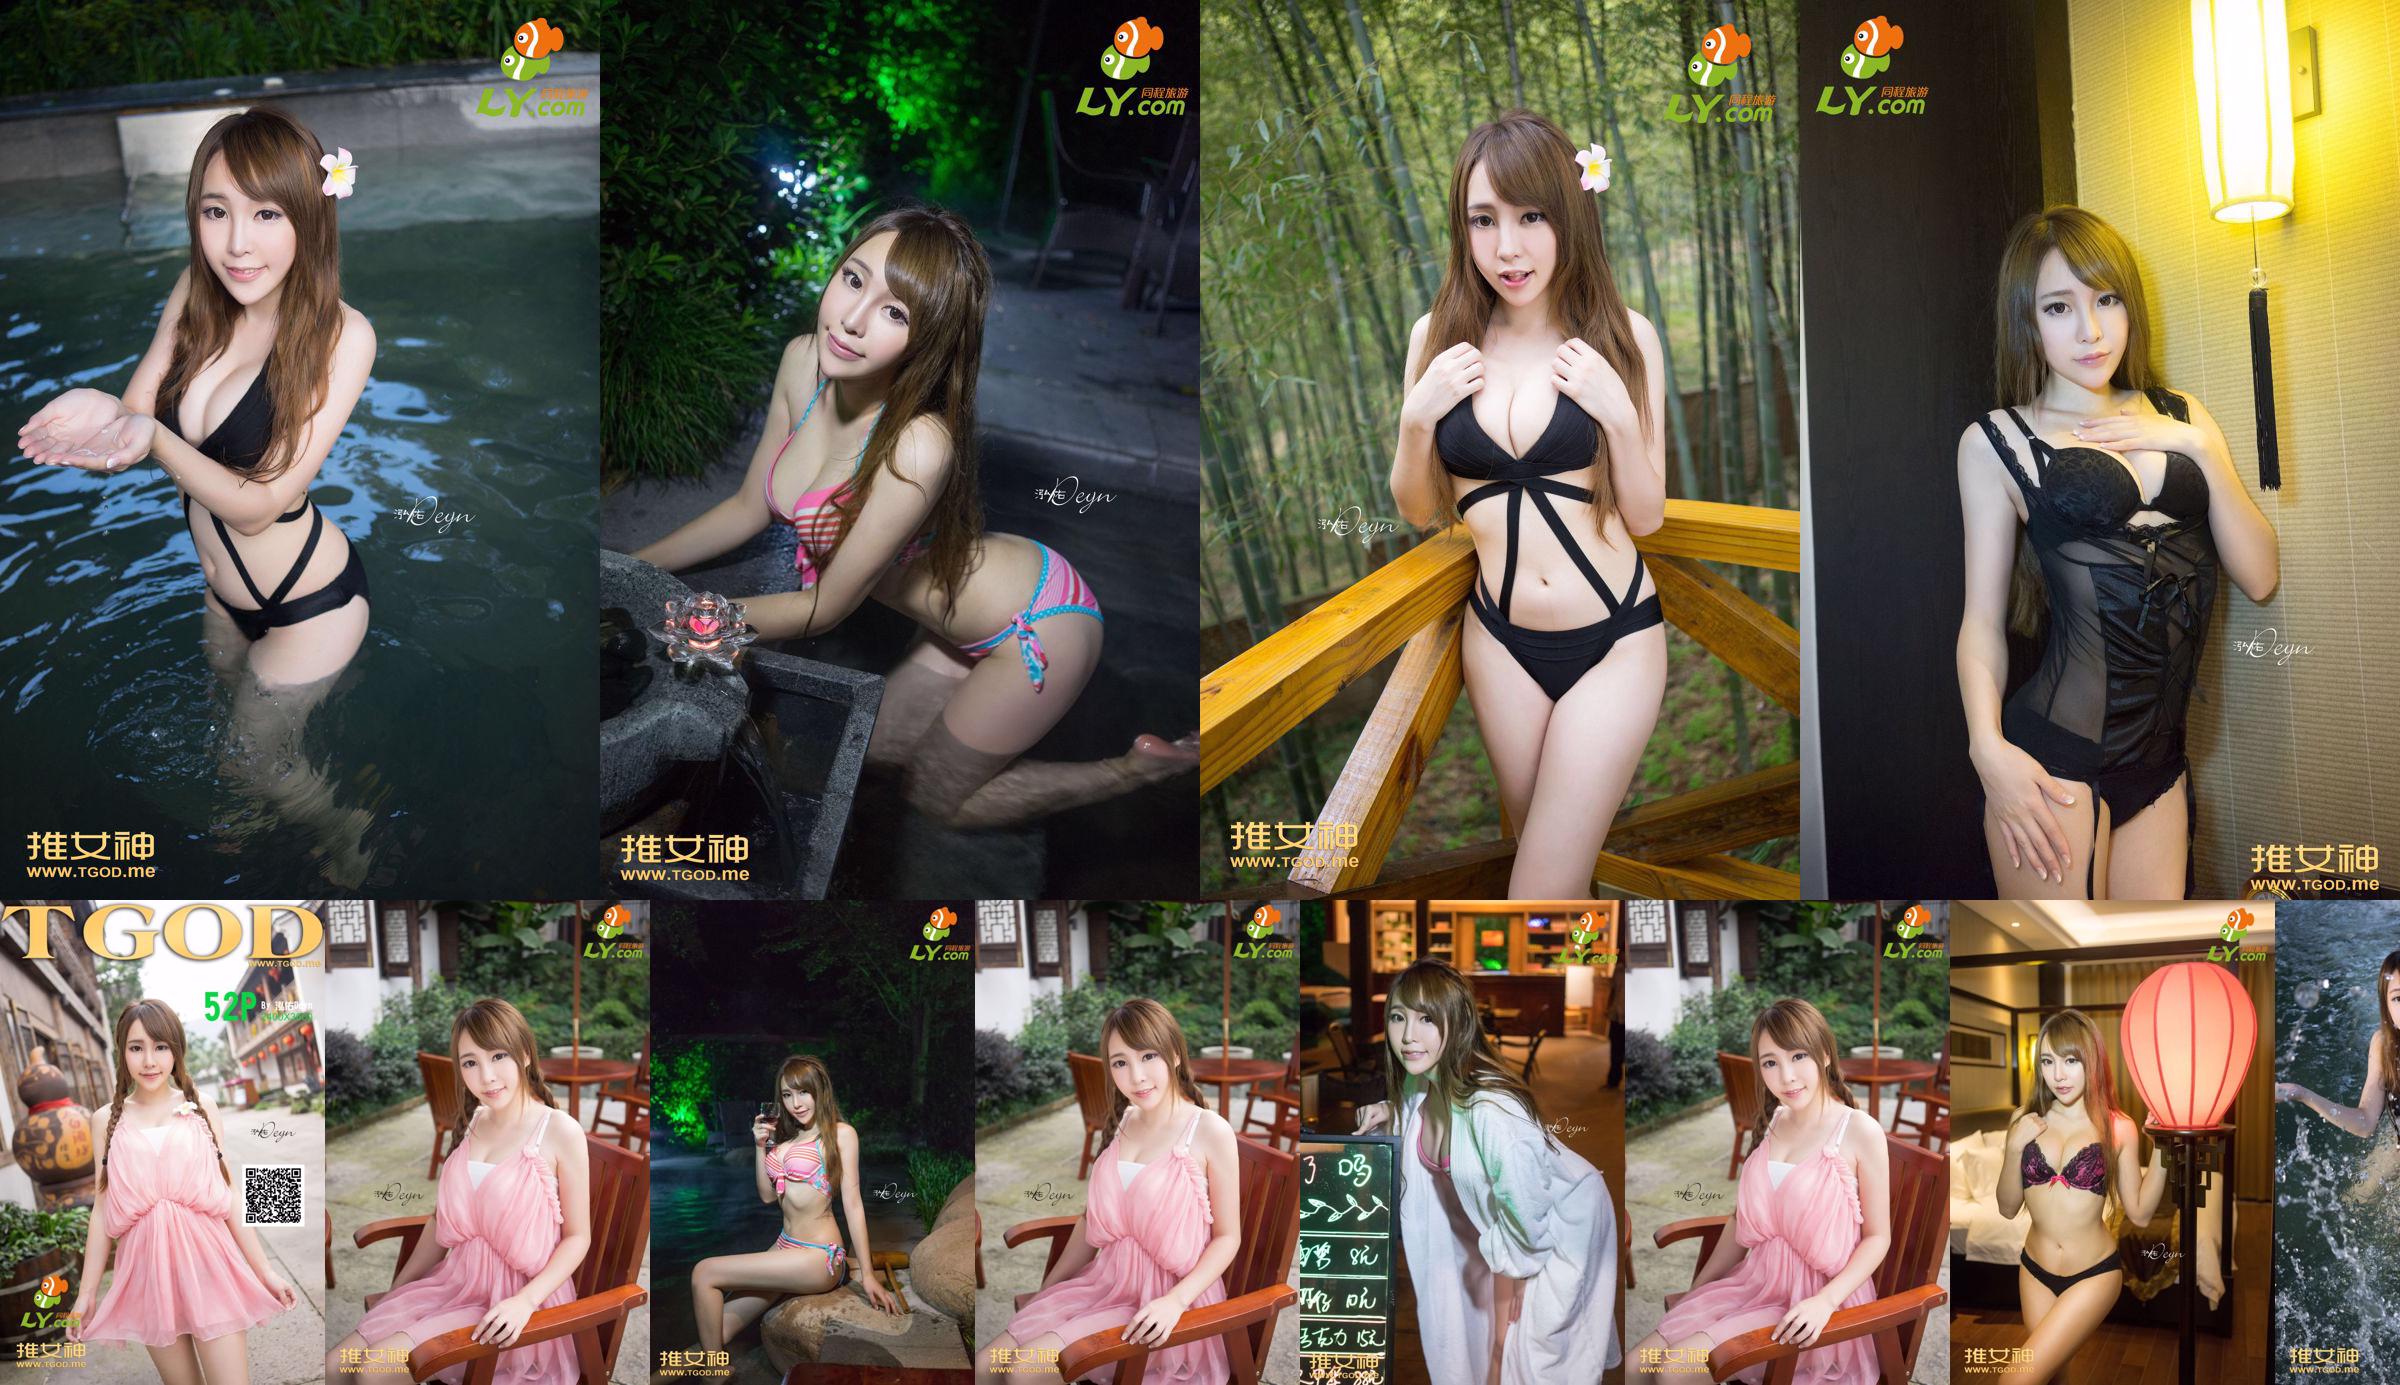 Huang Mengxian "Where Is the Goddess Going Issue 7" [TGOD Push Goddess] No.03f893 Pagina 1